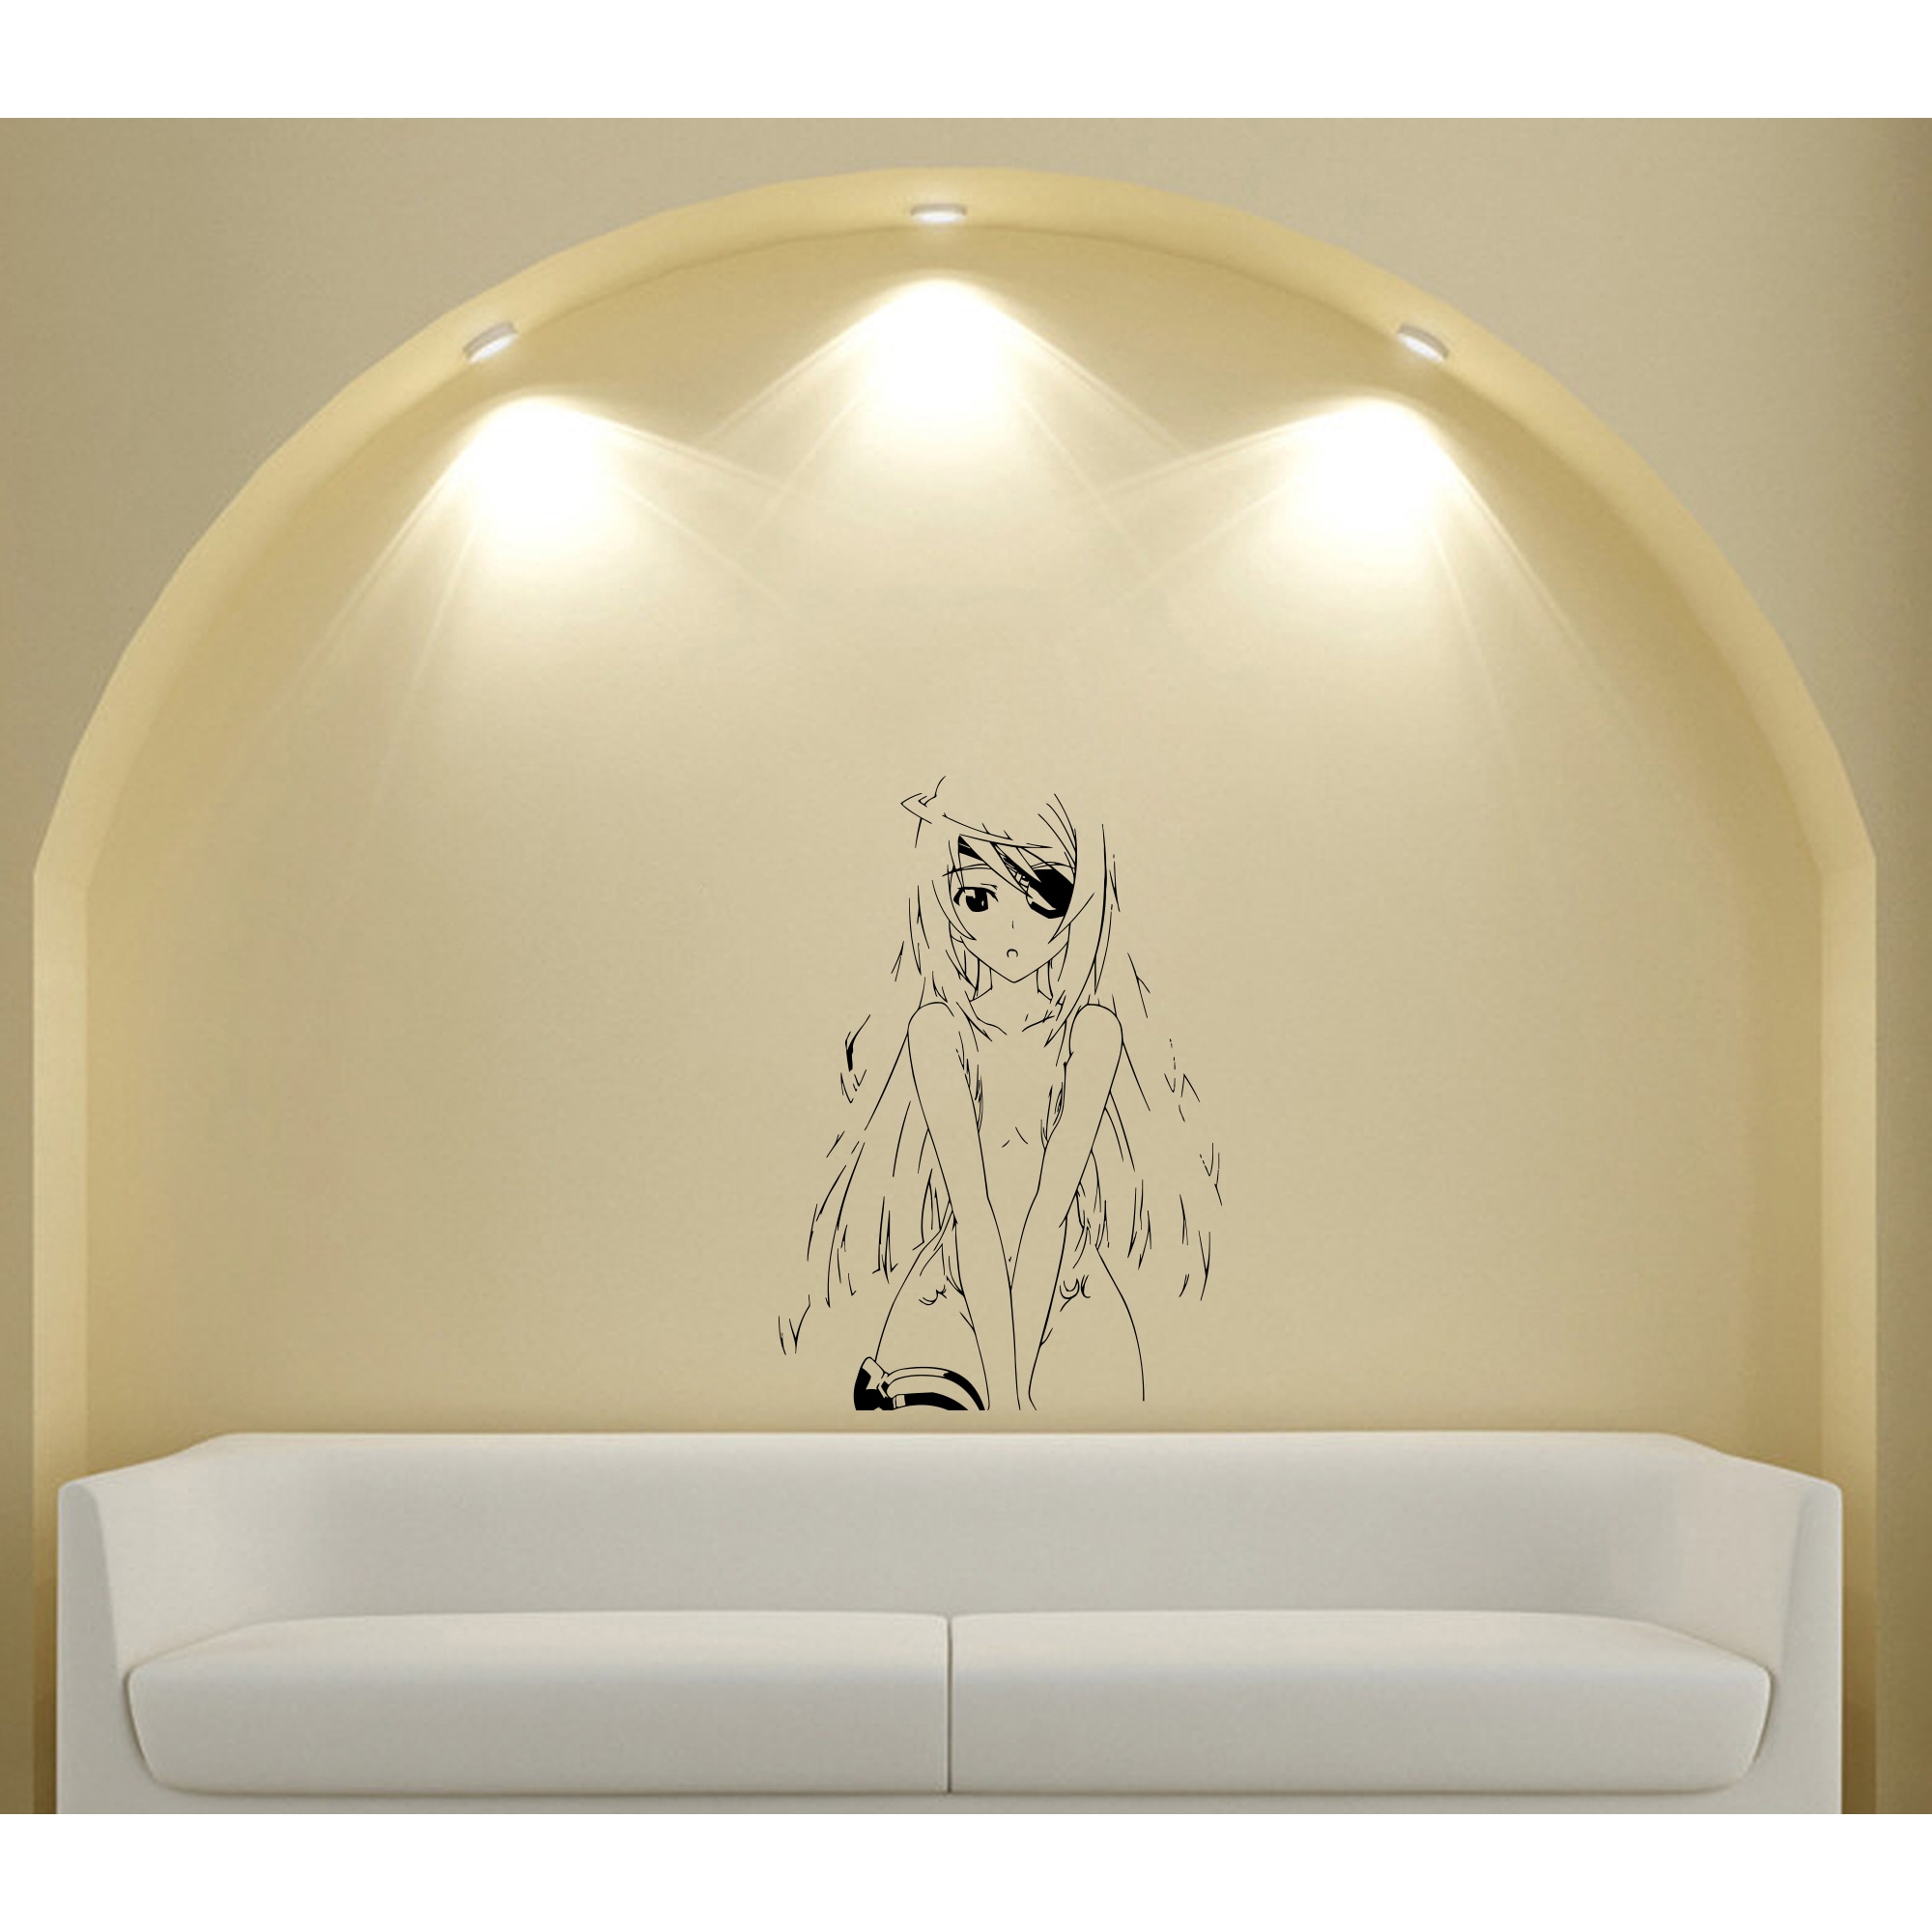 Japanese Manga Closed Eyes Girl Vinyl Decal Sticker (Glossy blackEasy to apply, instructions includedDimensions 25 inches wide x 35 inches long )